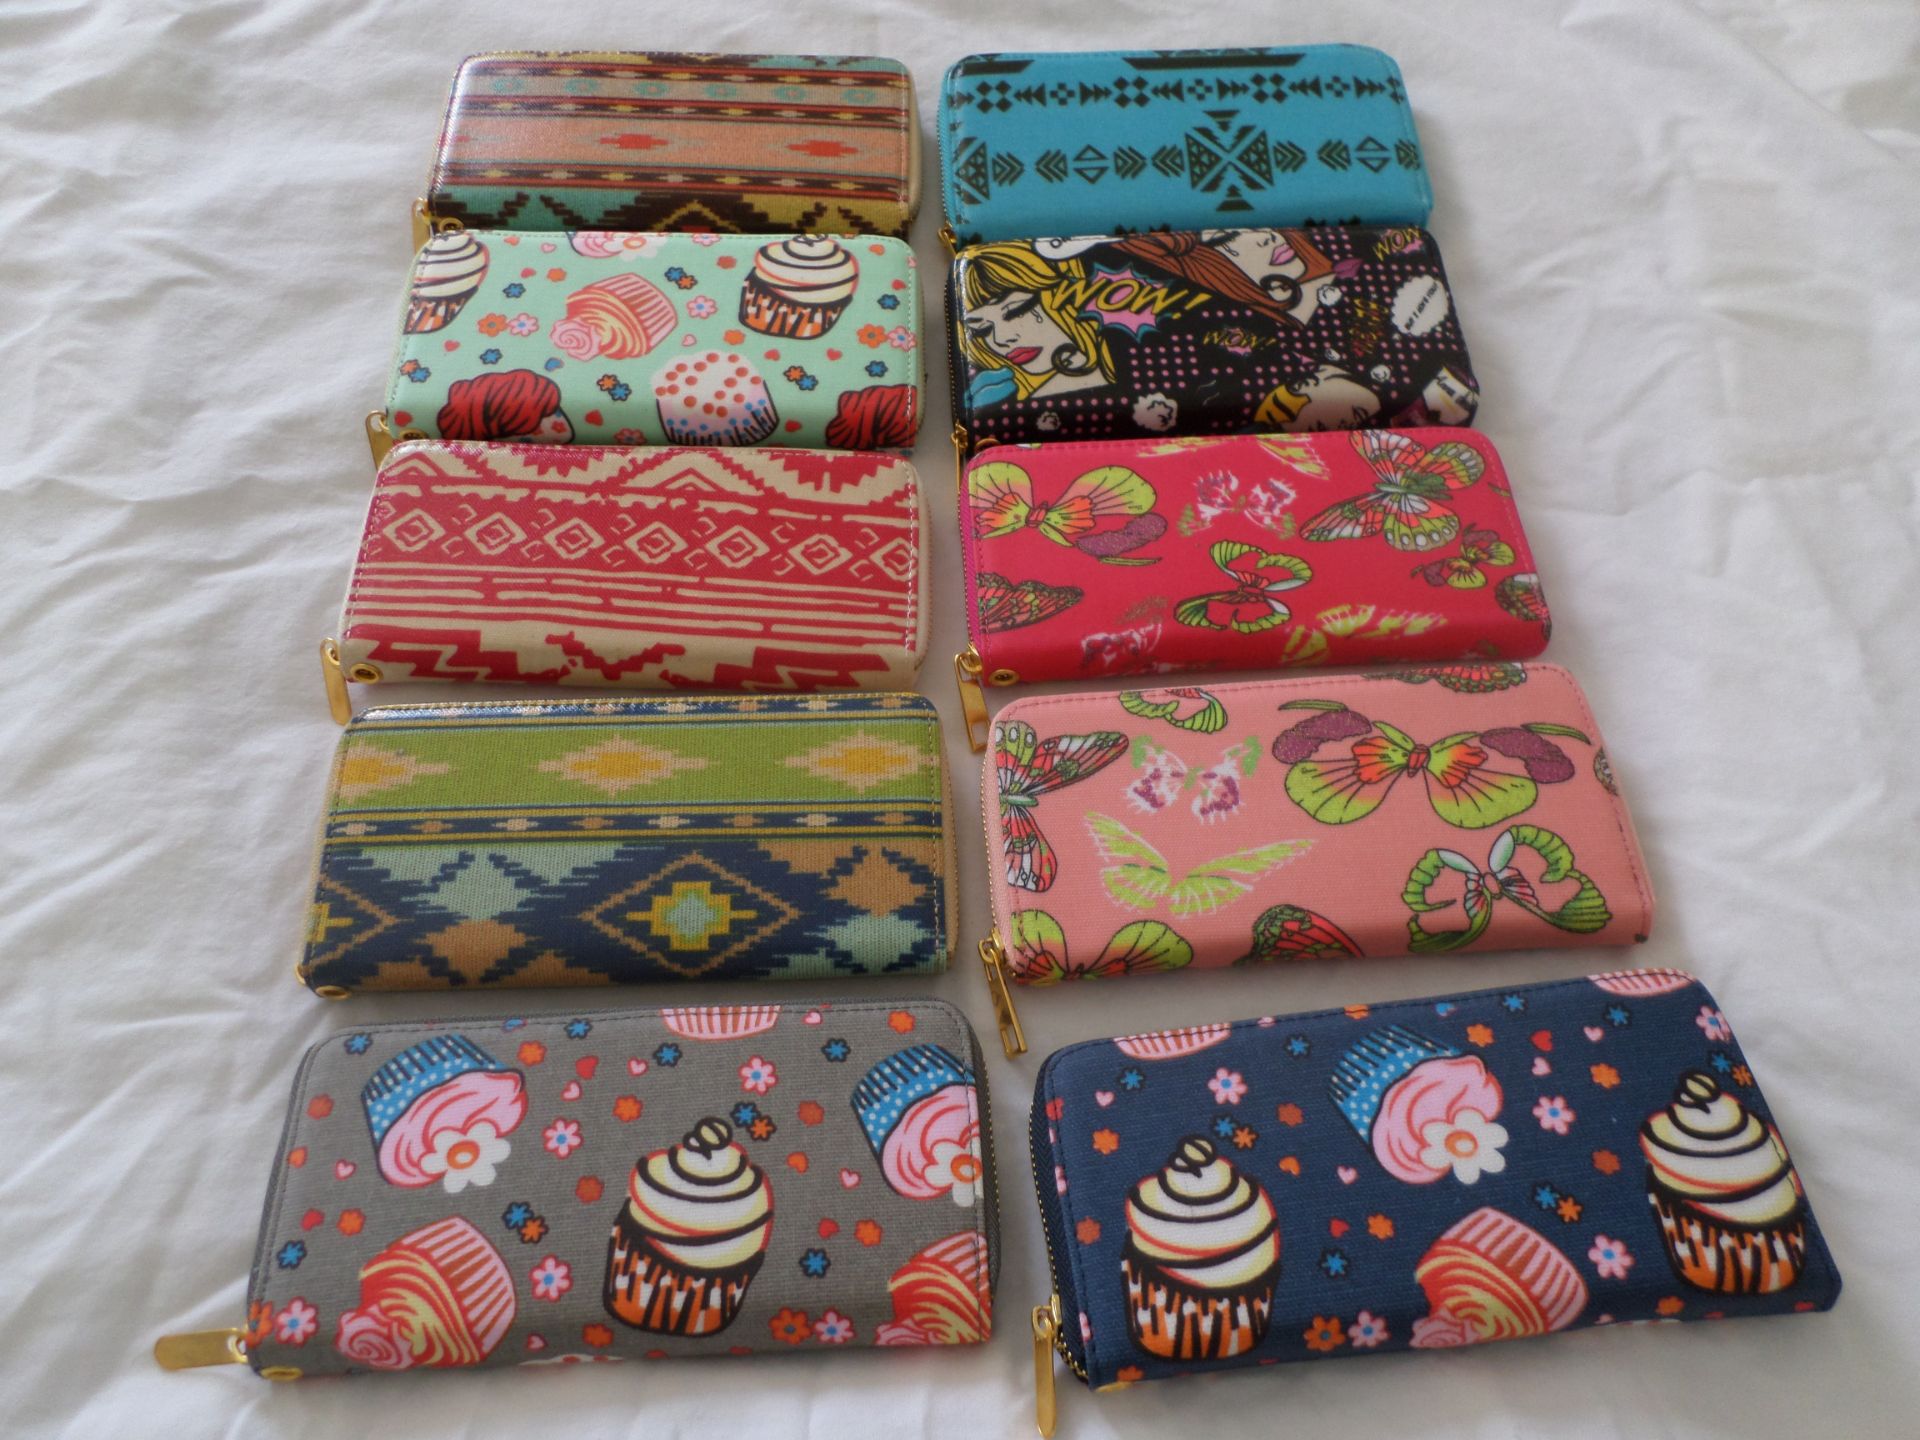 5 x Ladies Clutch/Purses RRP £14 Each. Brand New - Image 4 of 4